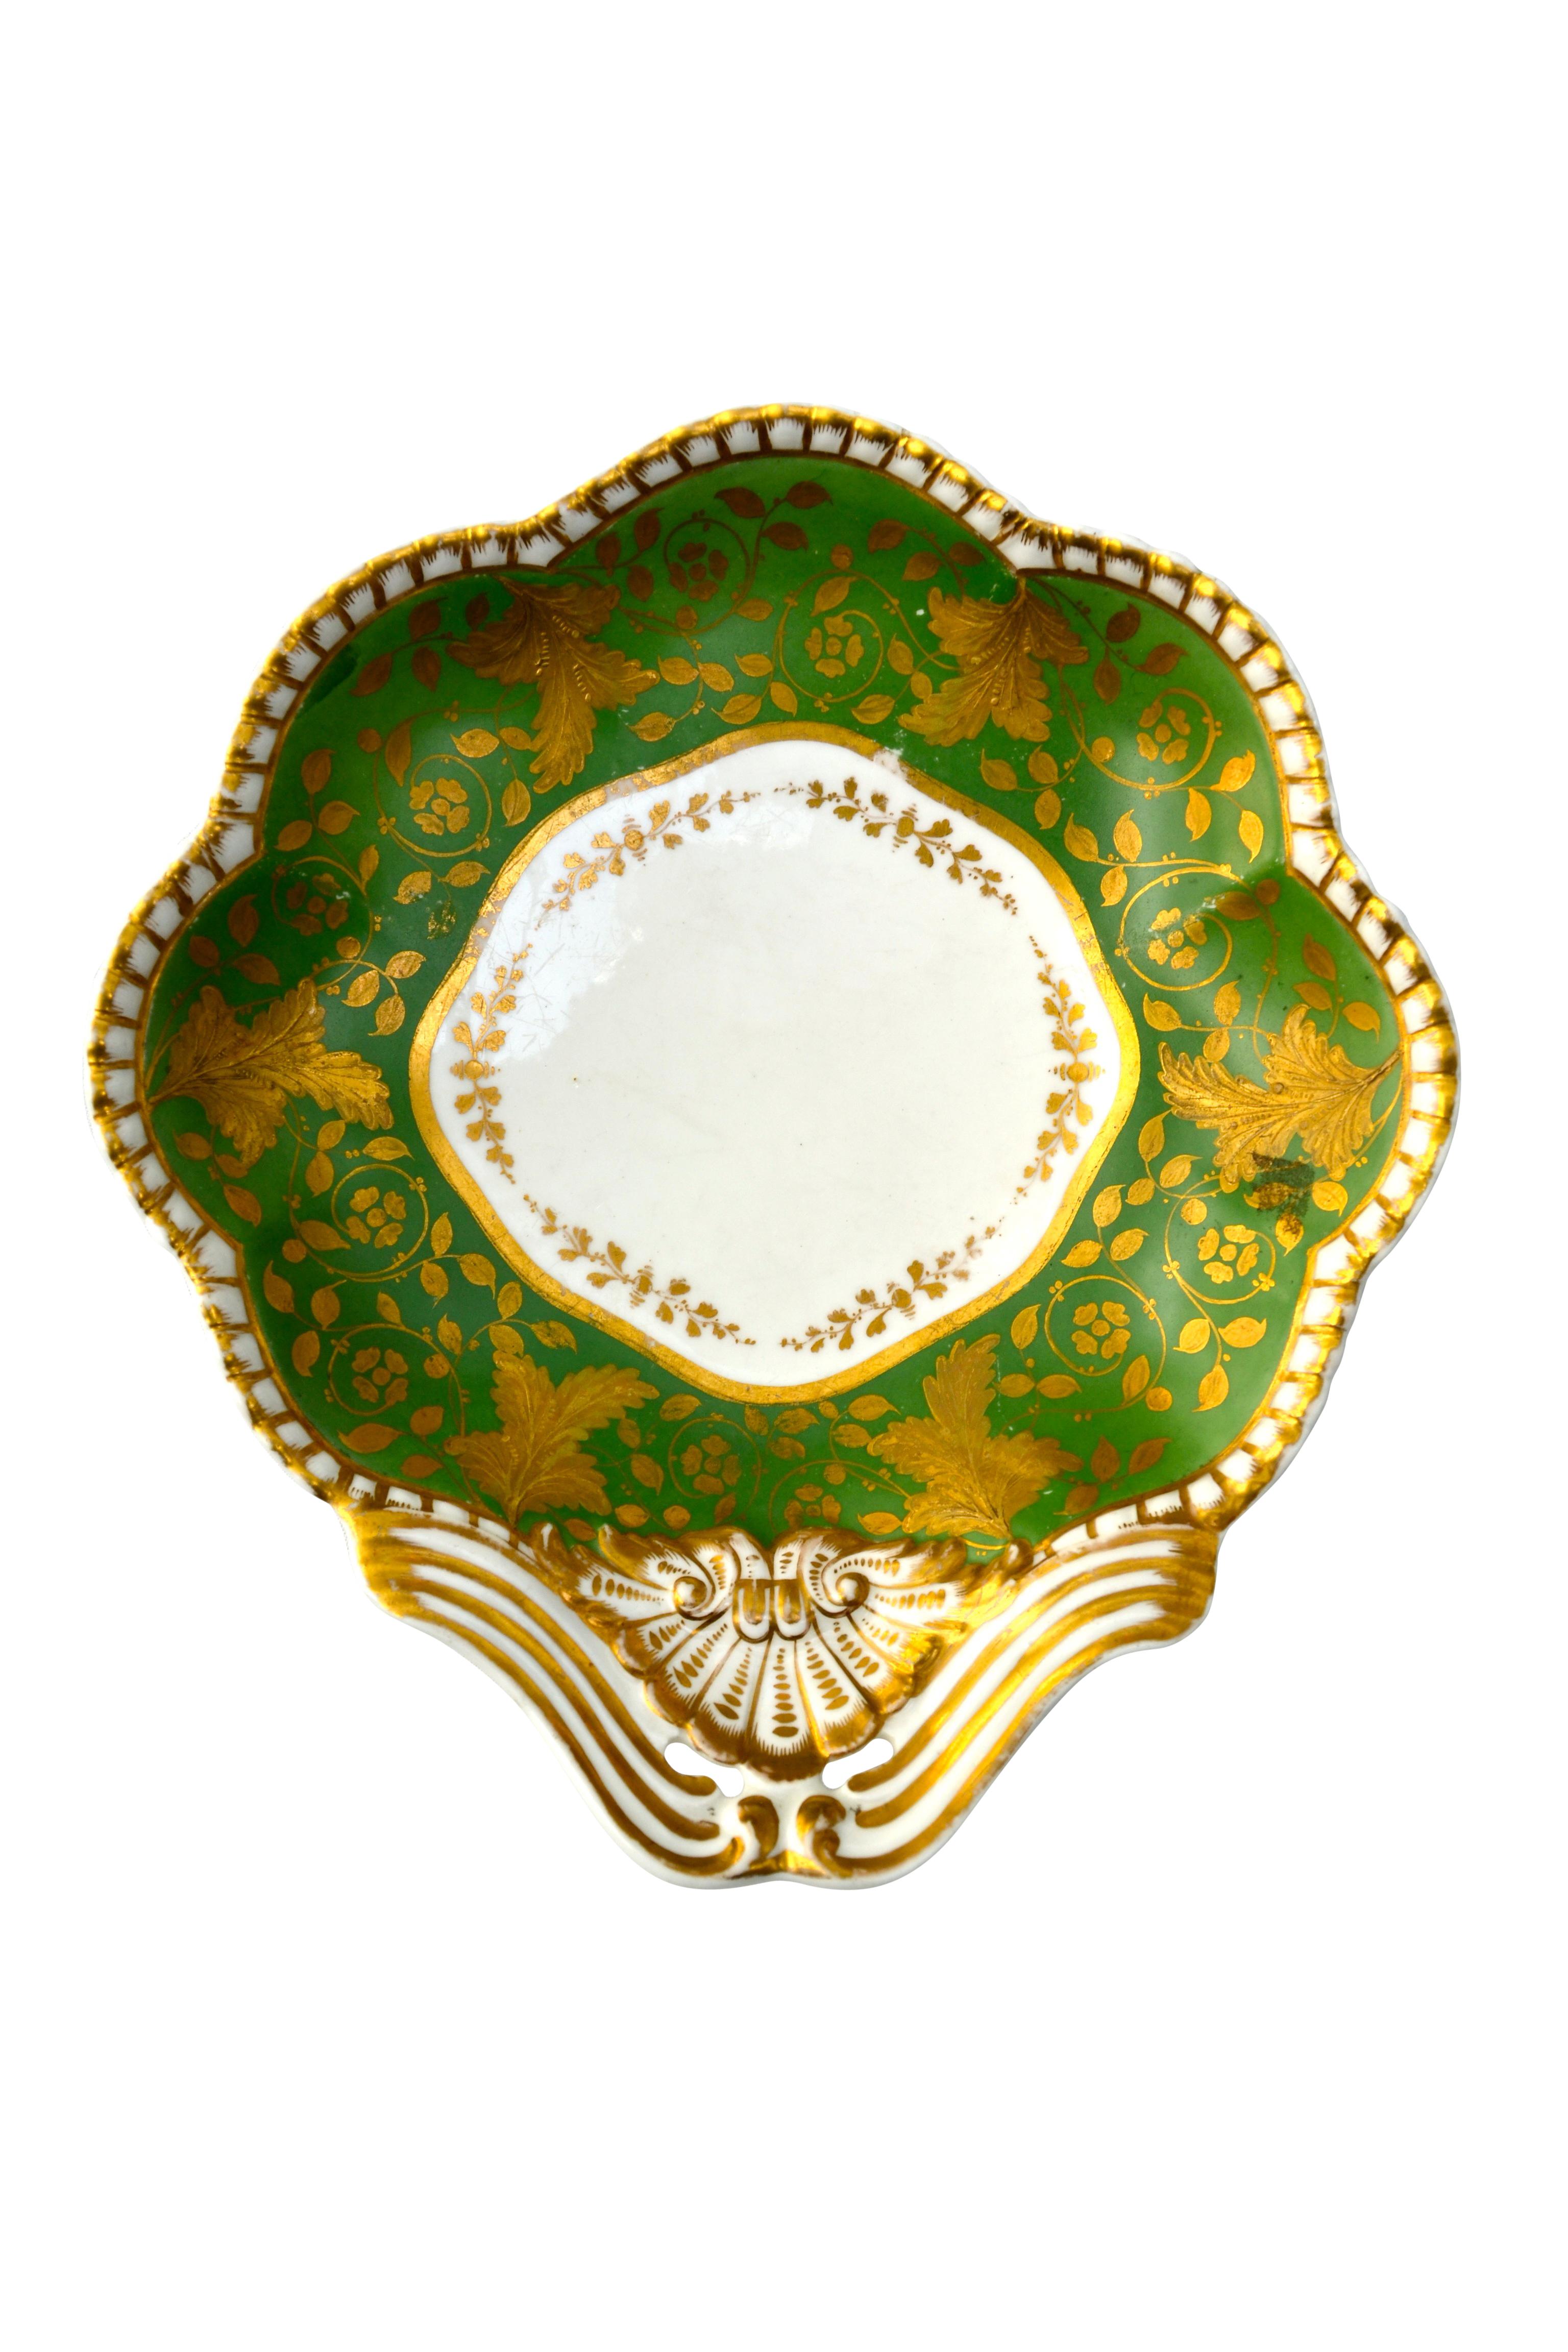 Six Georgian Spode Felspar Porcelain Serving Dishes in White Green and Gold 1